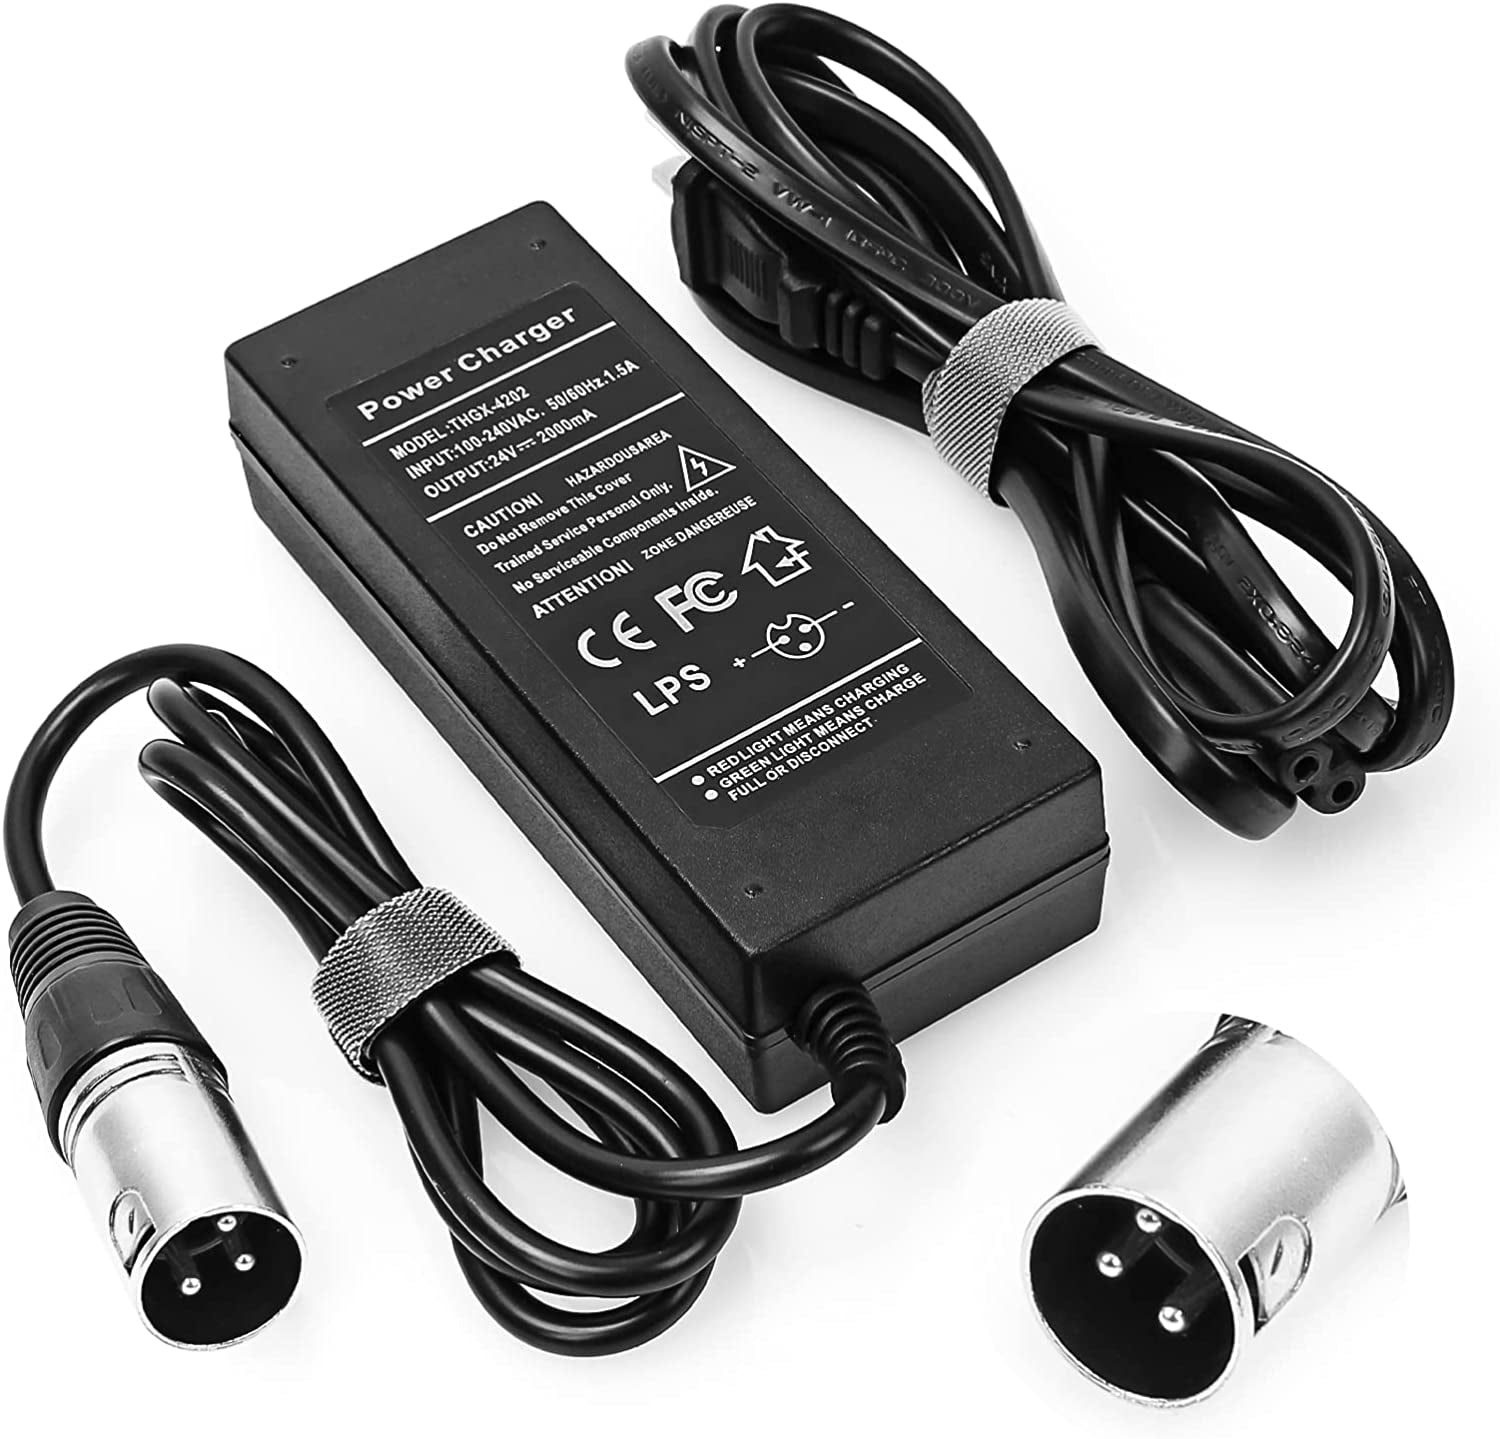 24V 2A 3-Pin XLR Connector Electronic Scooter Battery Charger for Go-Go  Elite Traveller,Pride Mobility,Jazzy Power Chair Battery Charger & Plus  Ezip